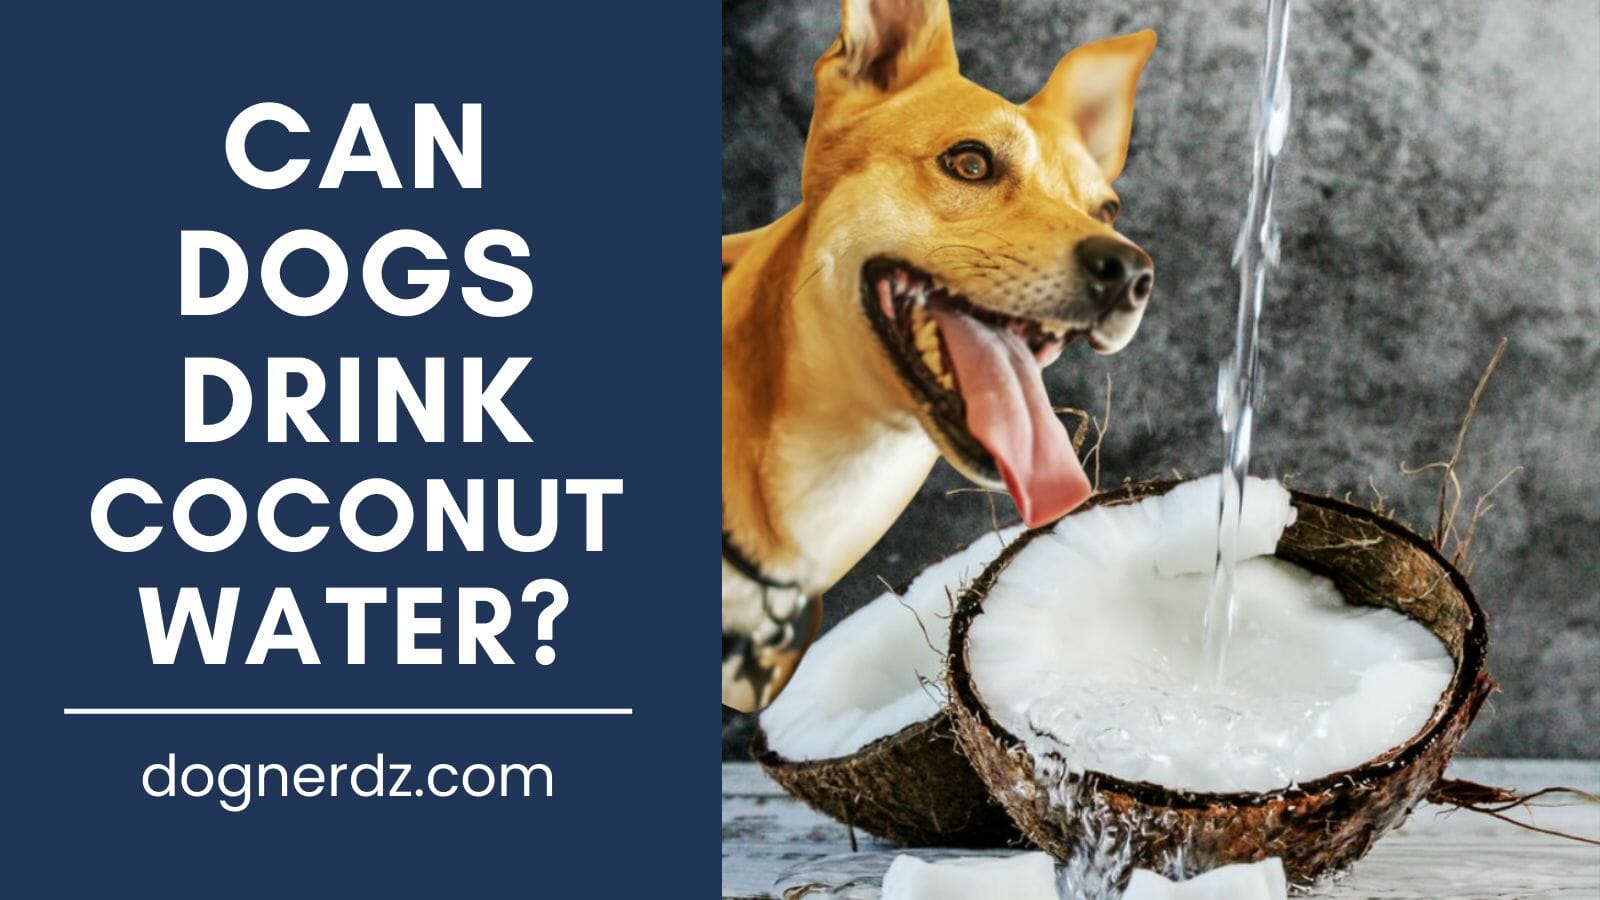 can dogs drink coconut water?